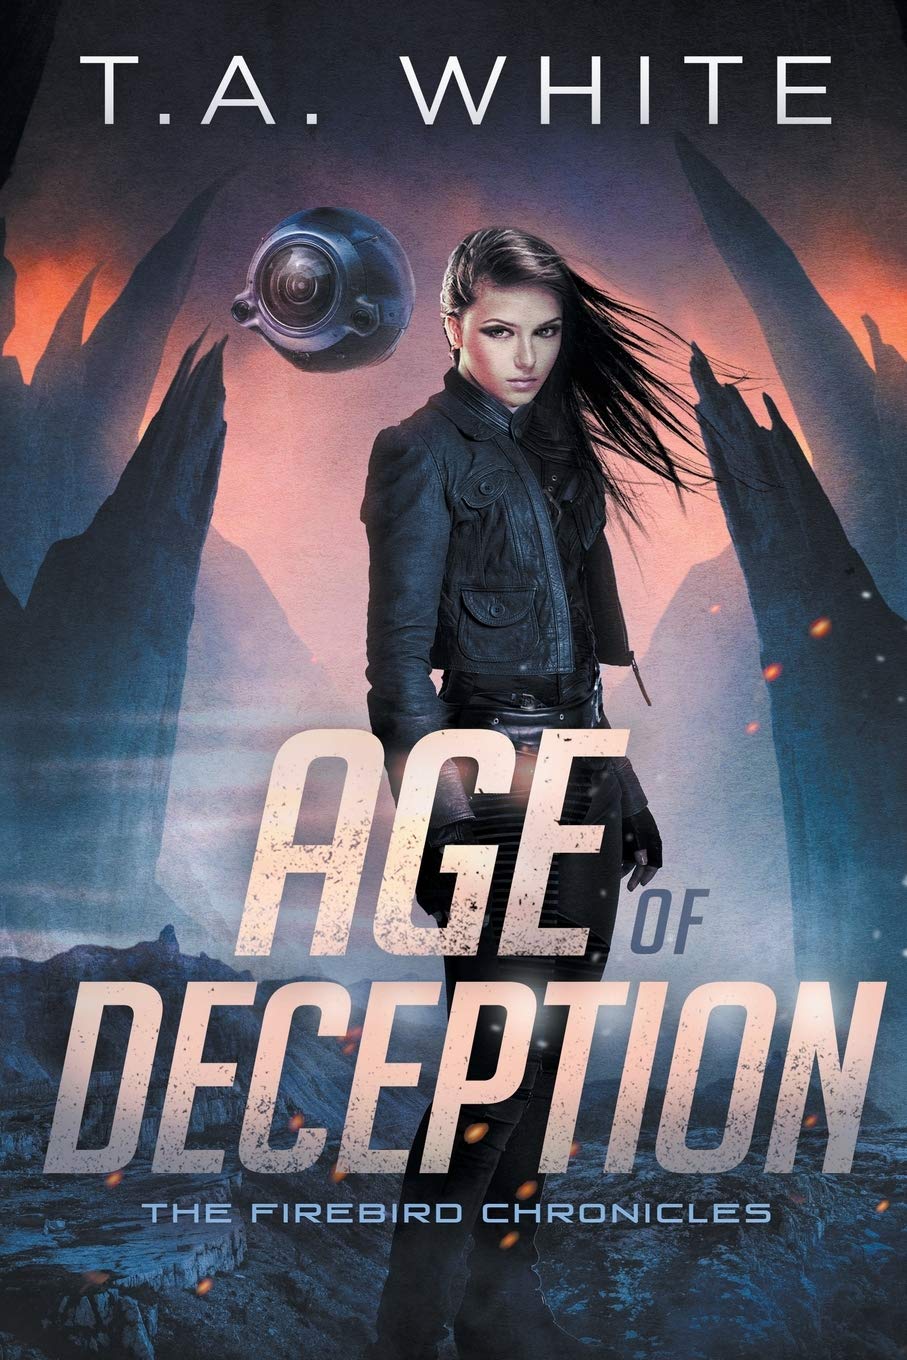 Age of Deception #2 by T.A. White Free ePub Download